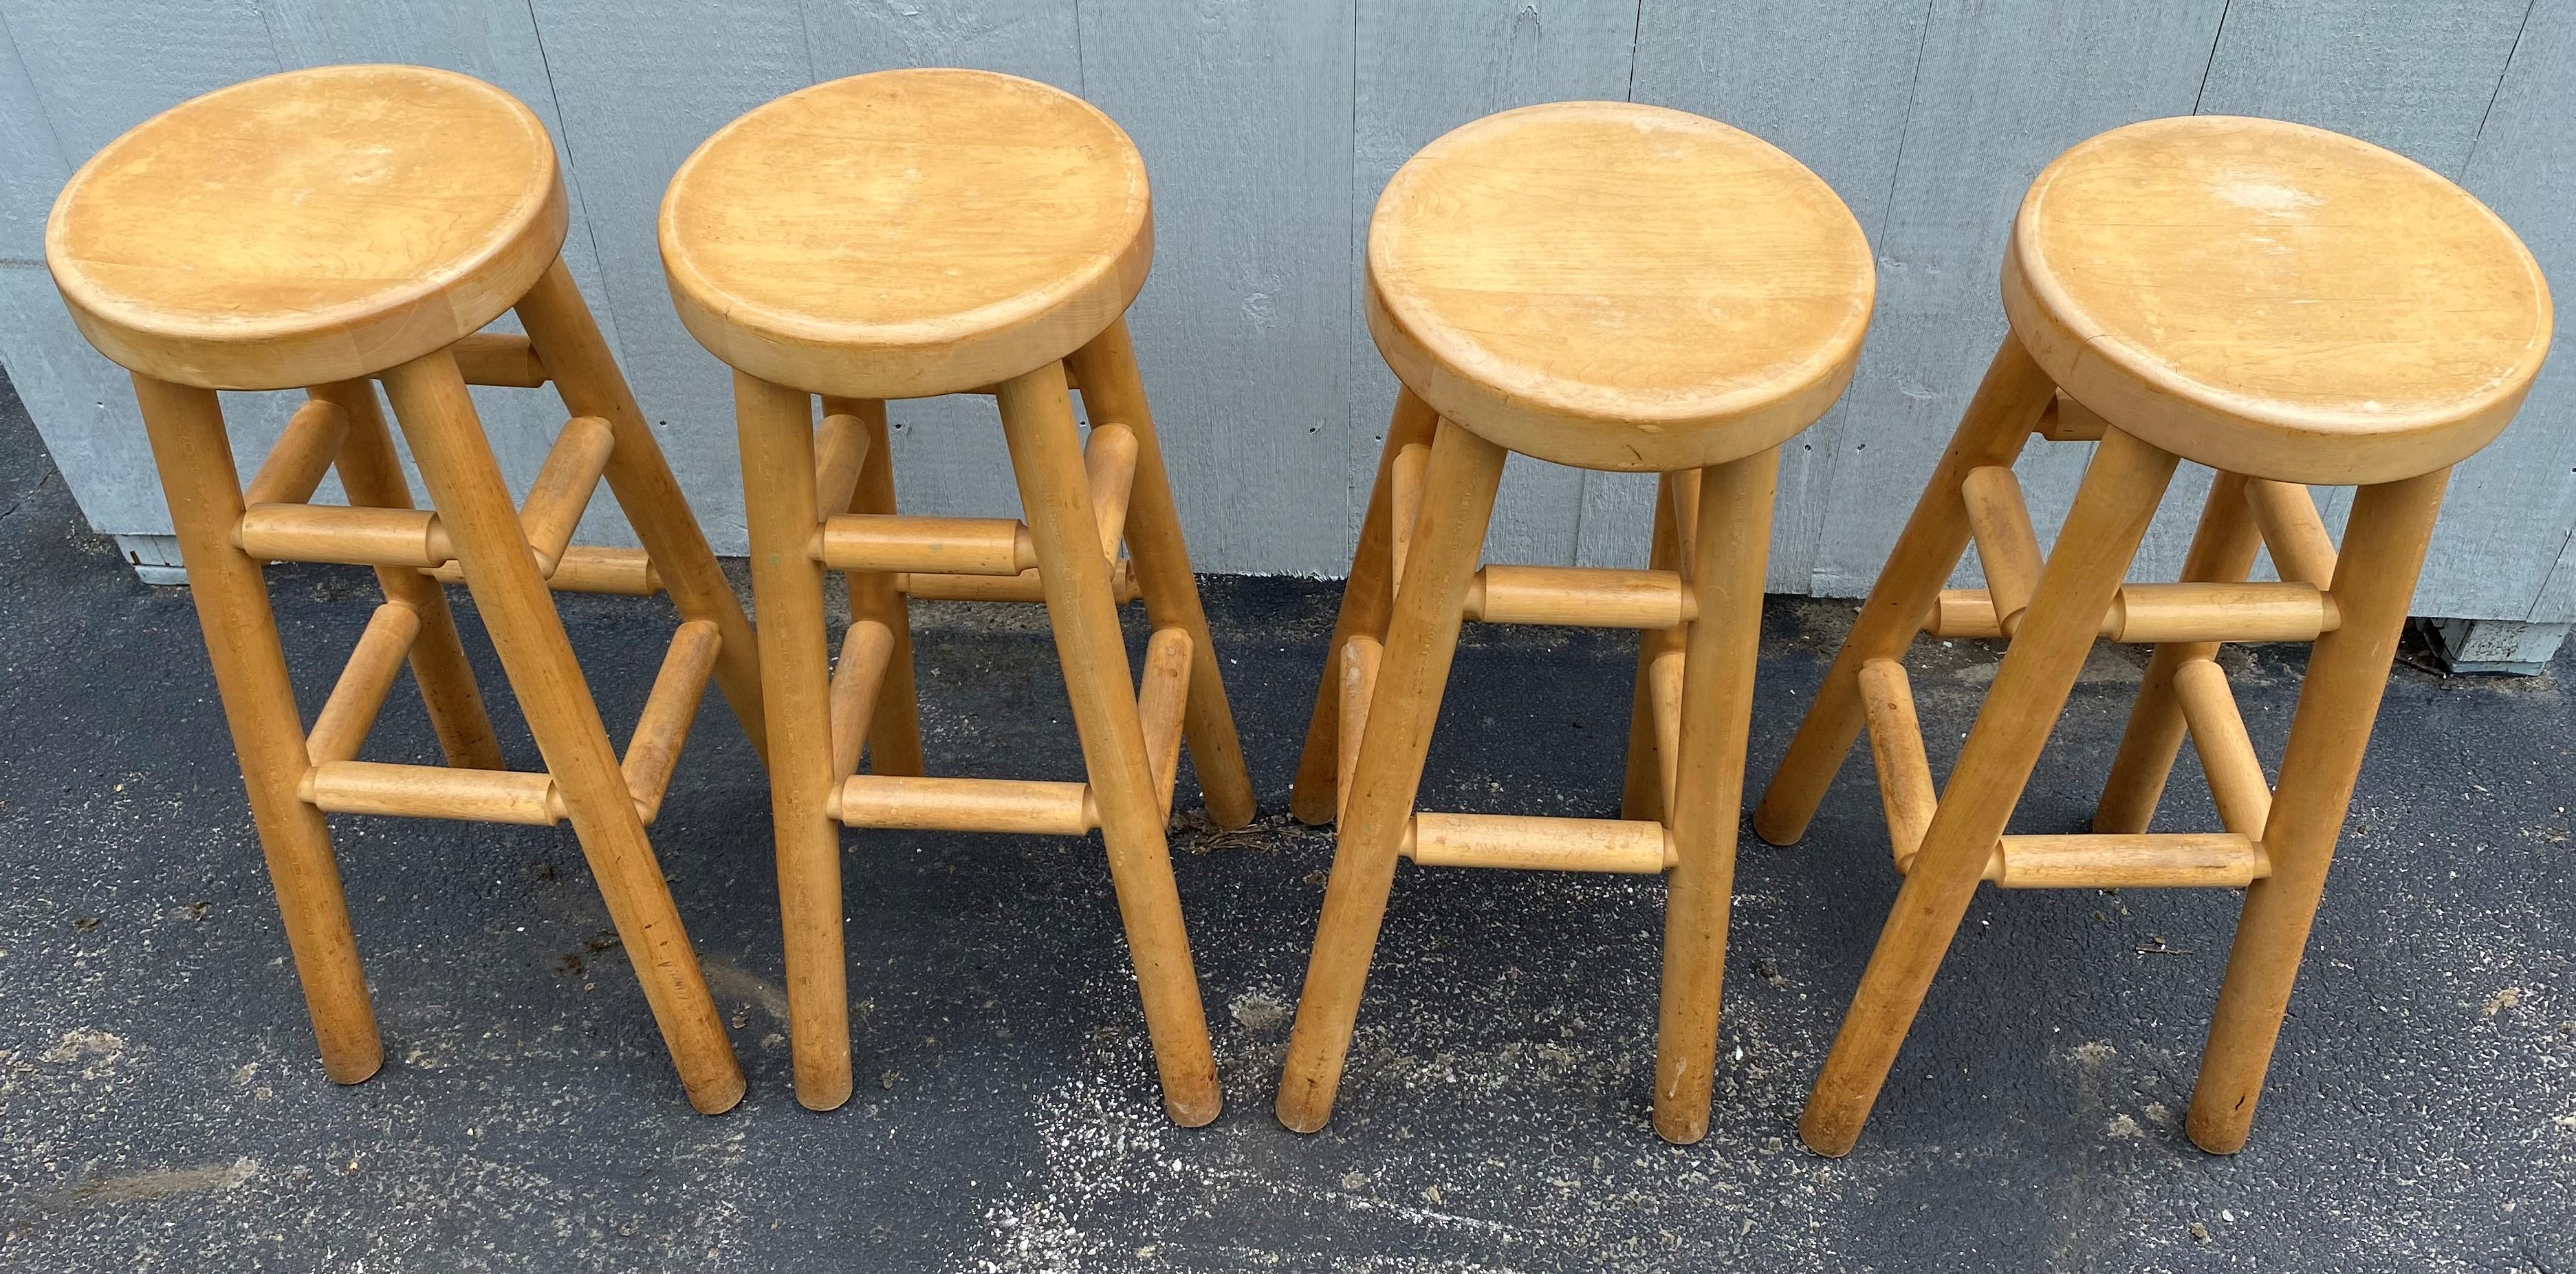 A fine solid set of four carved maple bar stools by Roy McMakin (b. 1956). McMakin is a San Diego-based artist, designer, furniture maker, and architect. In 1987, he opened his first showroom on Los Angeles' Beverly Boulevard, called Domestic